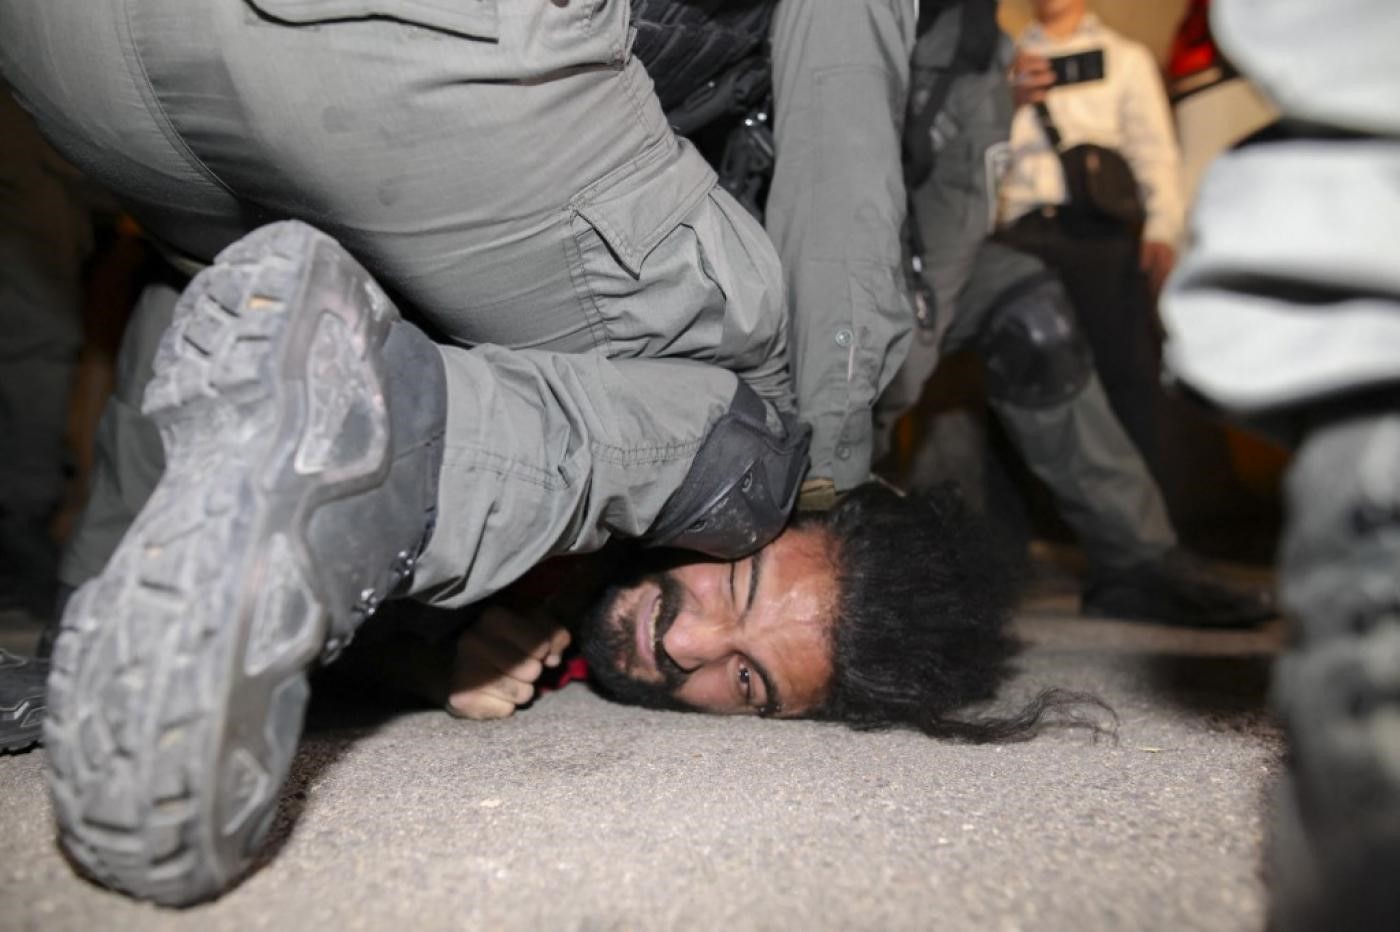 Israeli security forces detain a Palestinian man as families face eviction in Sheikh Jarrah on 4 May 2021 (AFP)